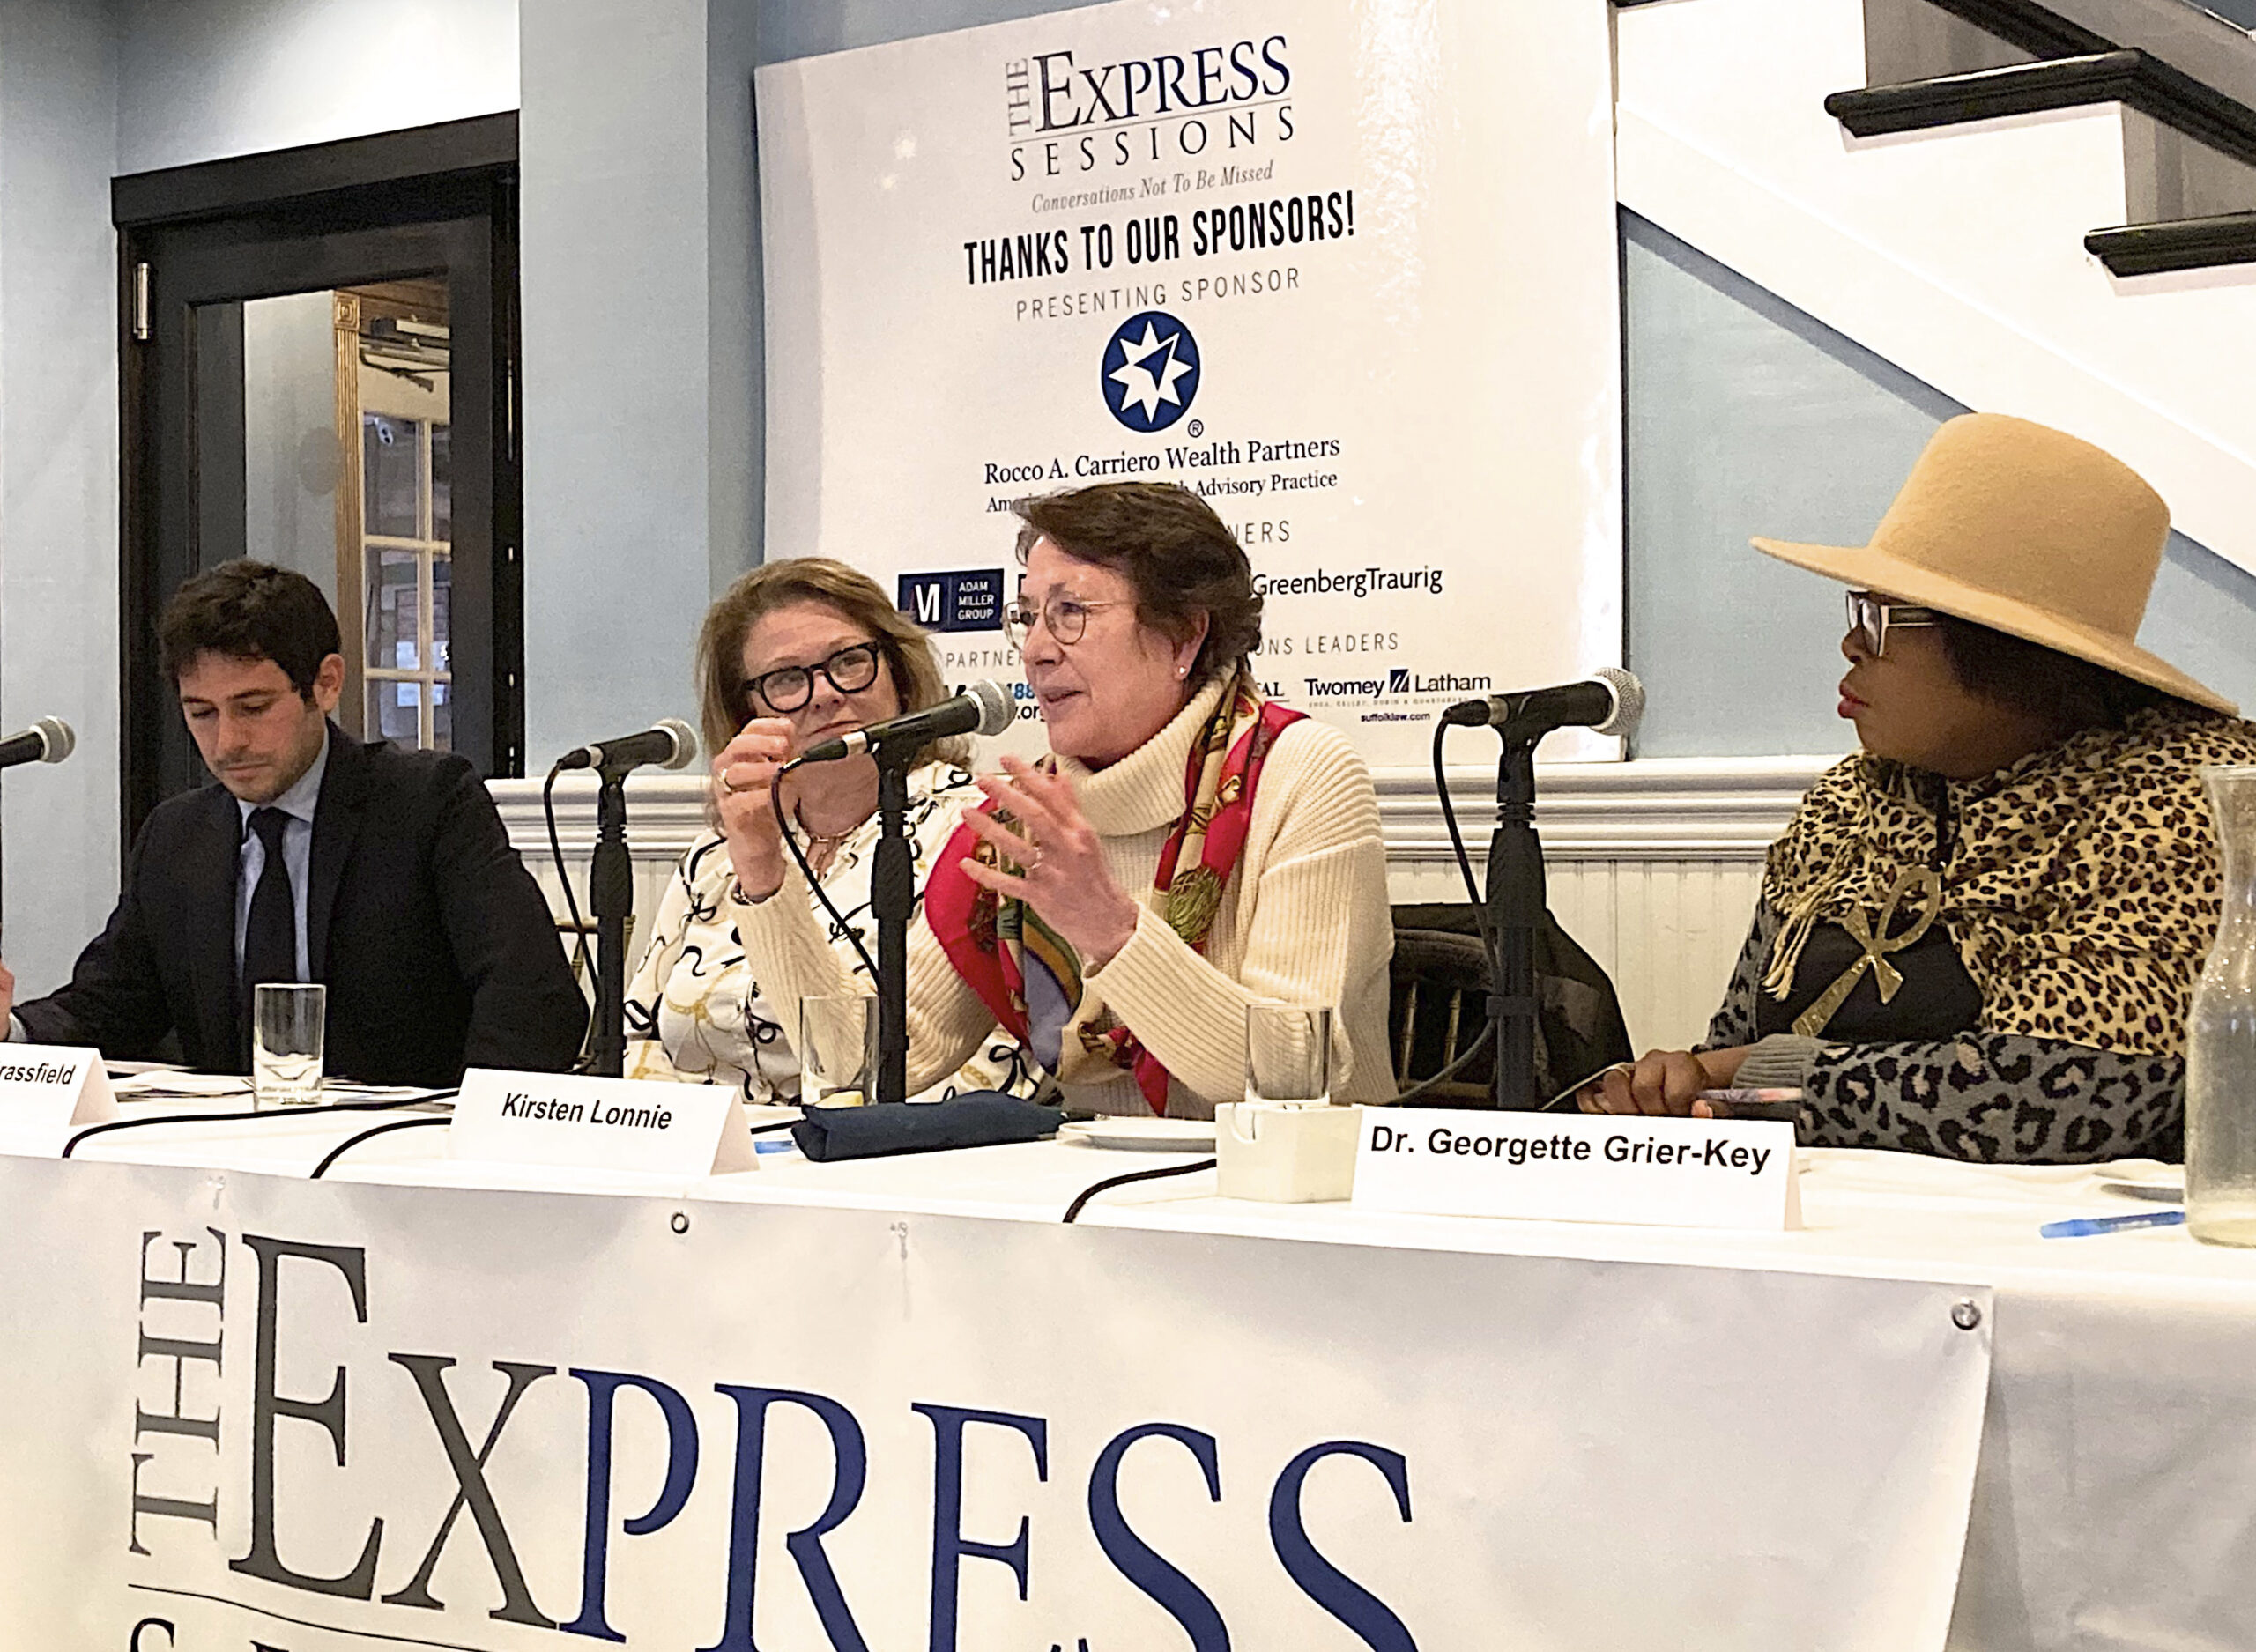 Panelist Kirsten Lonnie makes a point at the Express Session on January 12.  KYRIL BROMLEY